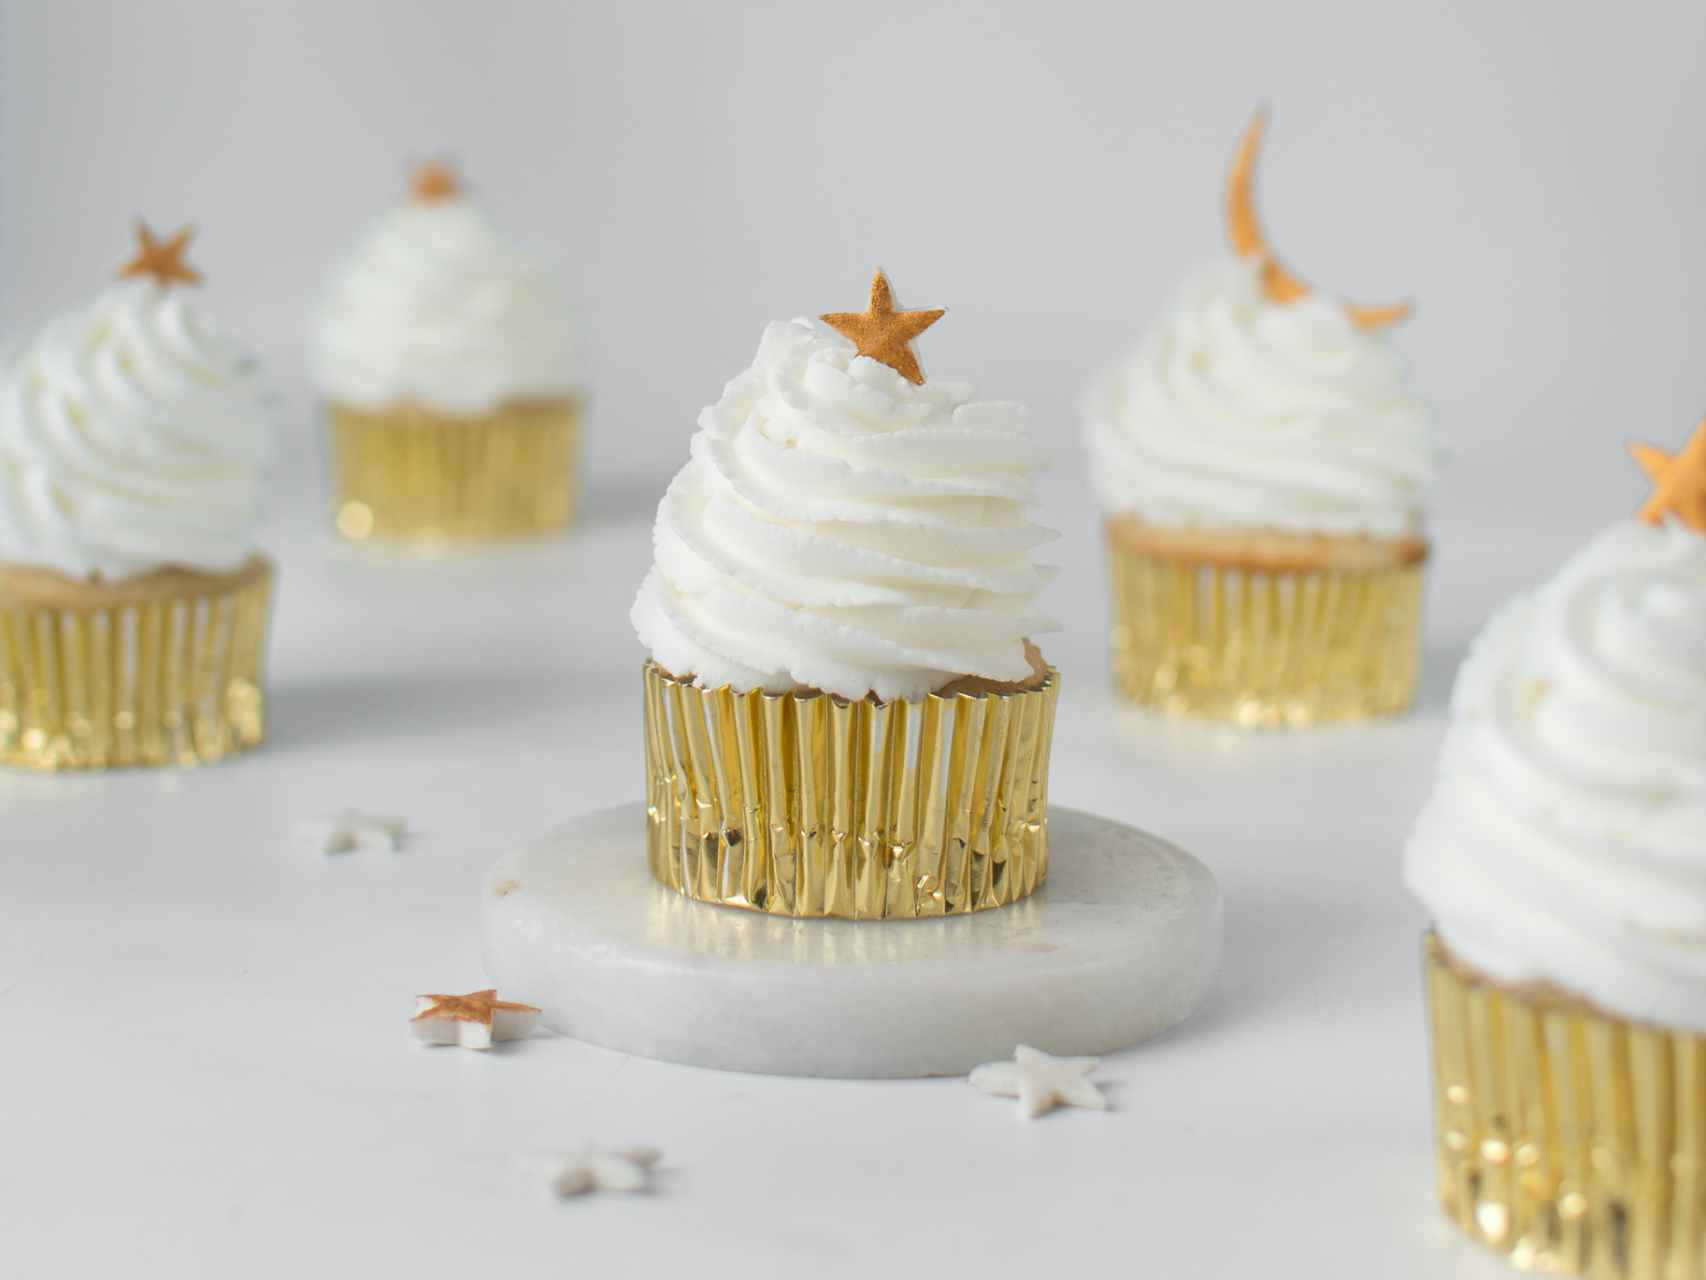 Some vanilla cupcakes with shiny decorations